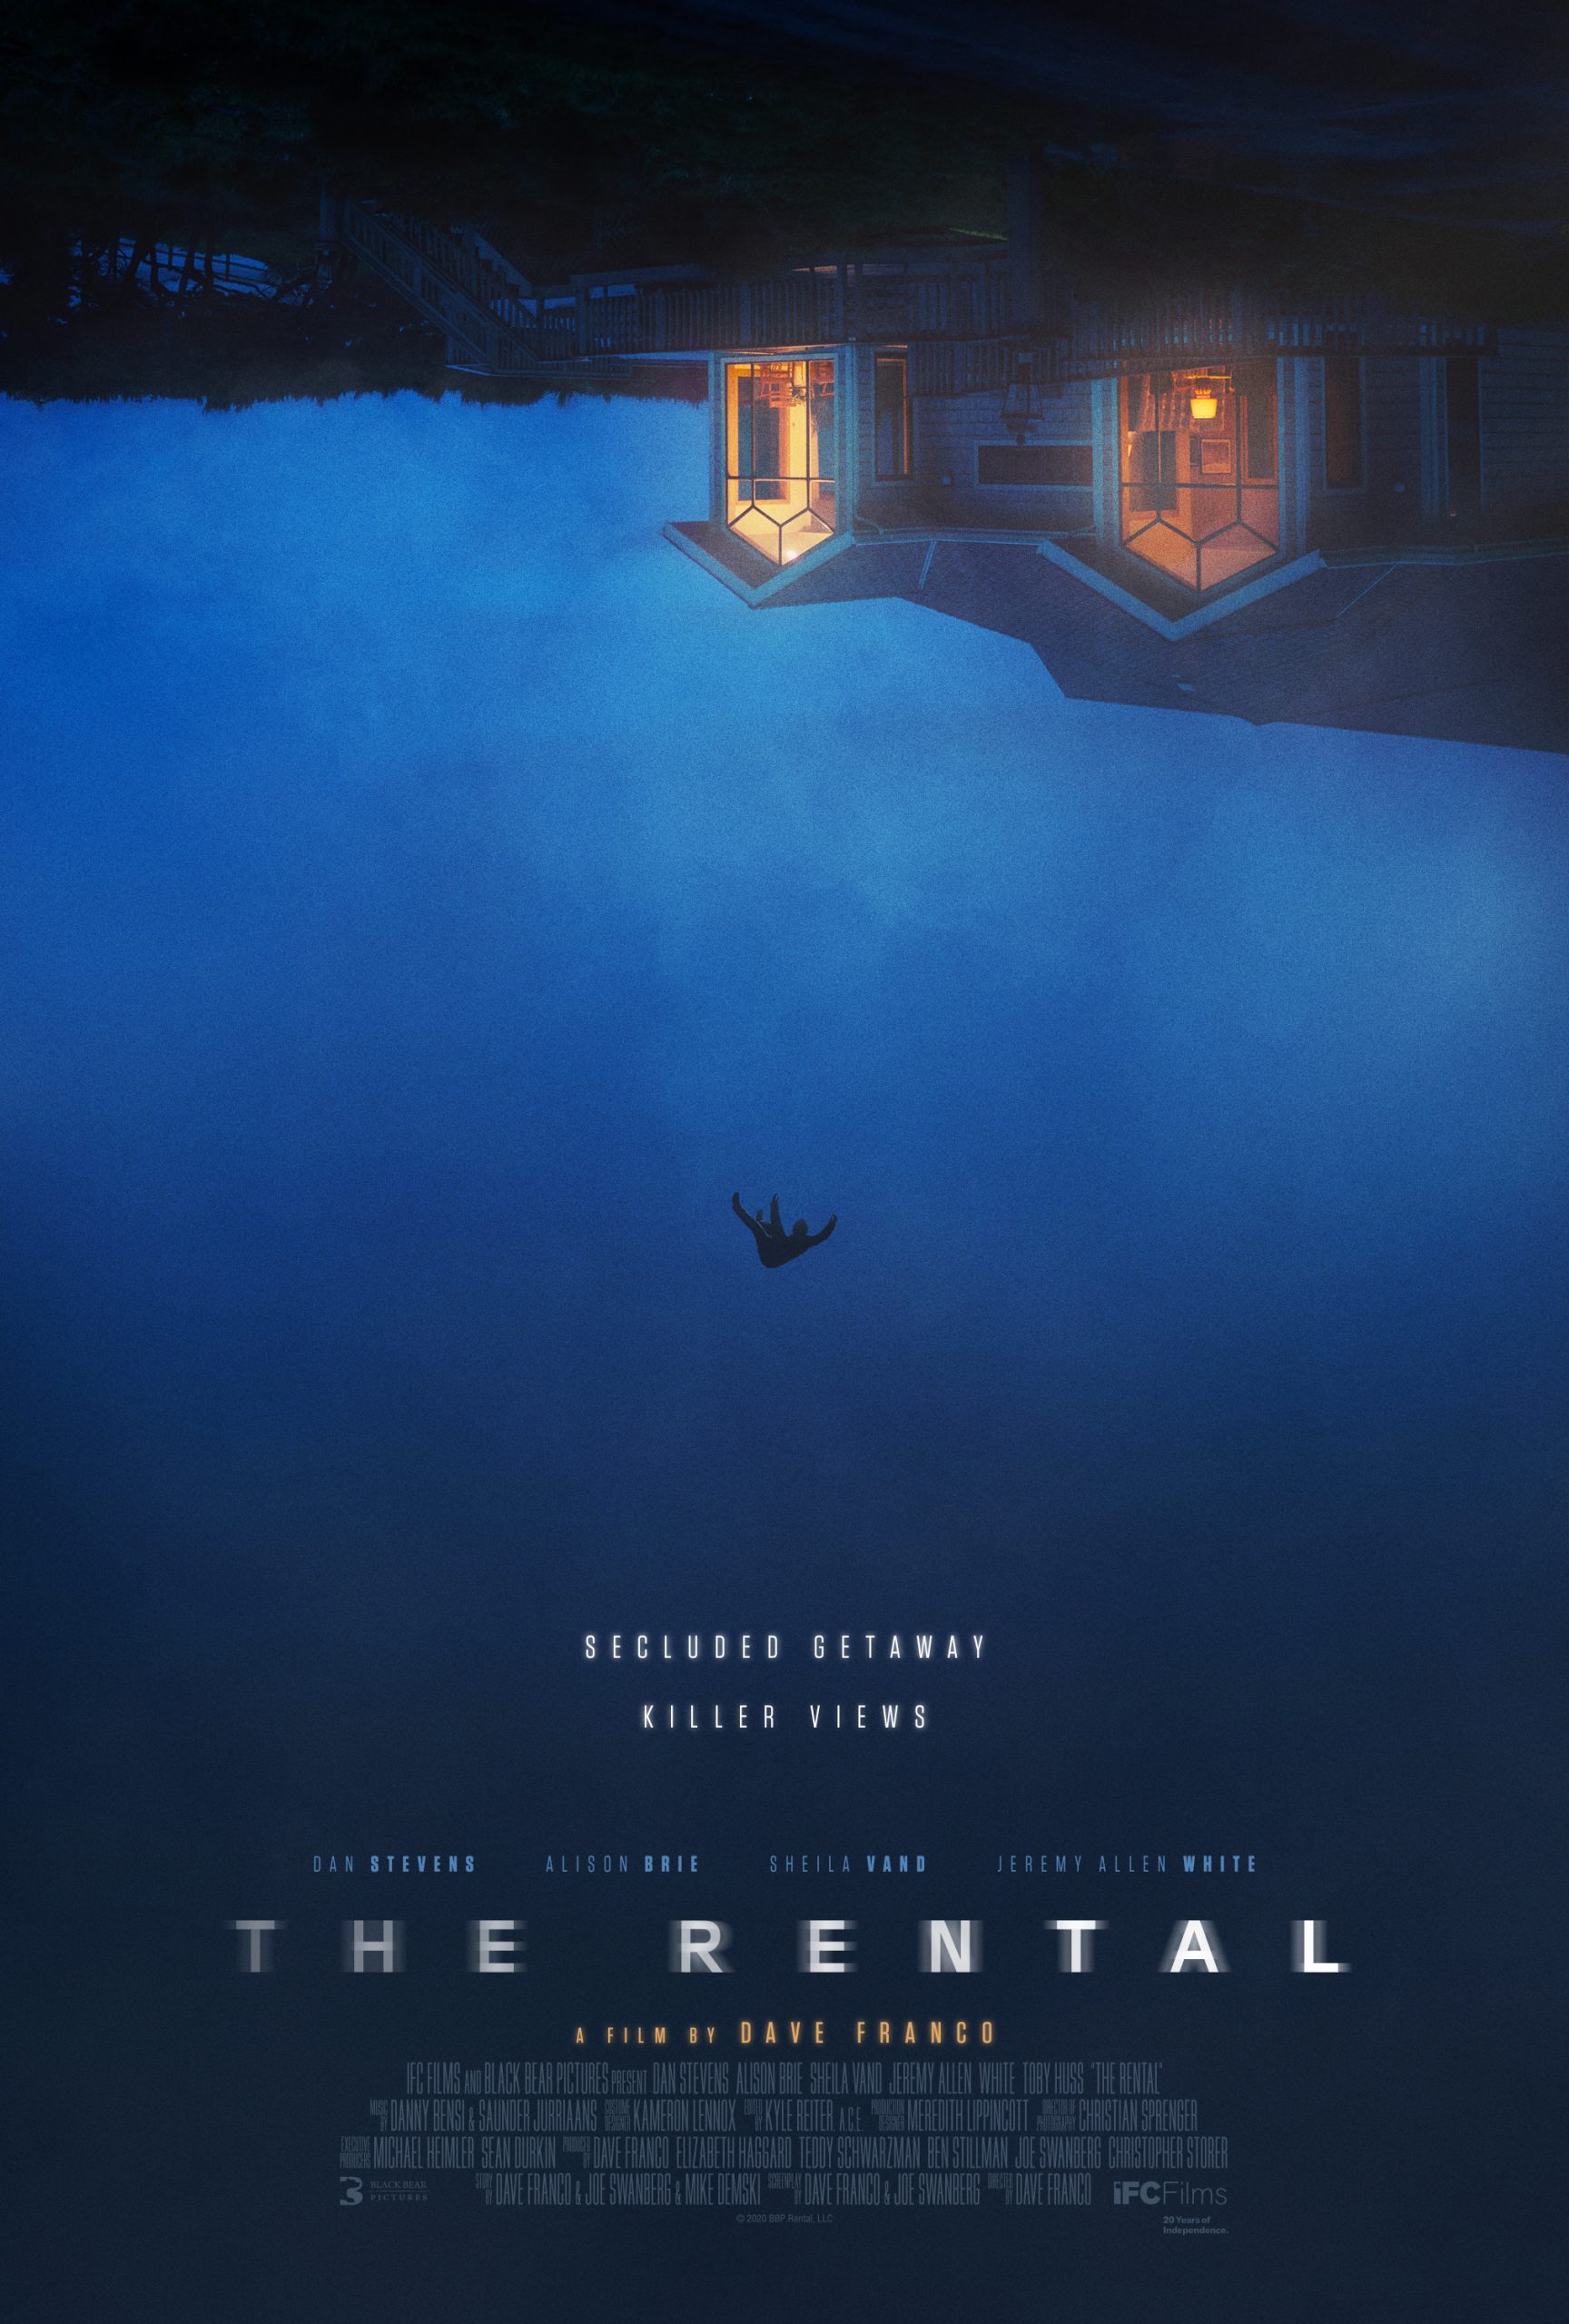 [Movie Review] THE RENTAL